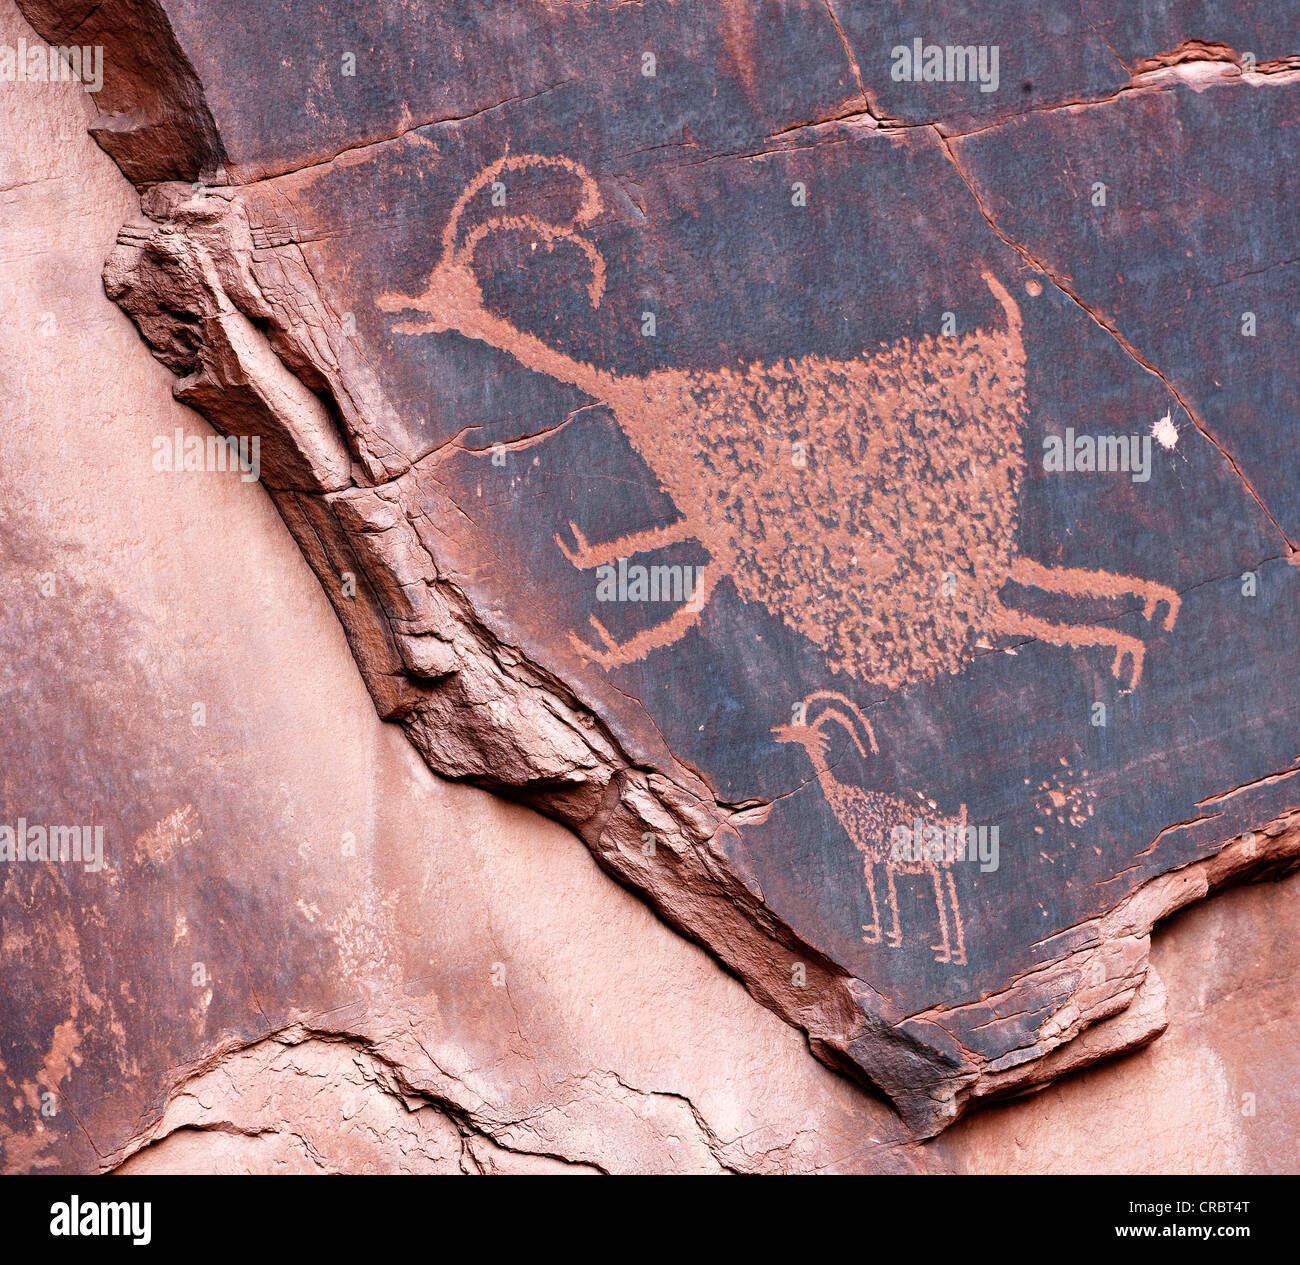 Petroglyphs etched in sandstone, symbols, prehistoric and historic rock art, wall drawings by the Anasazi Native Americans Stock Photo